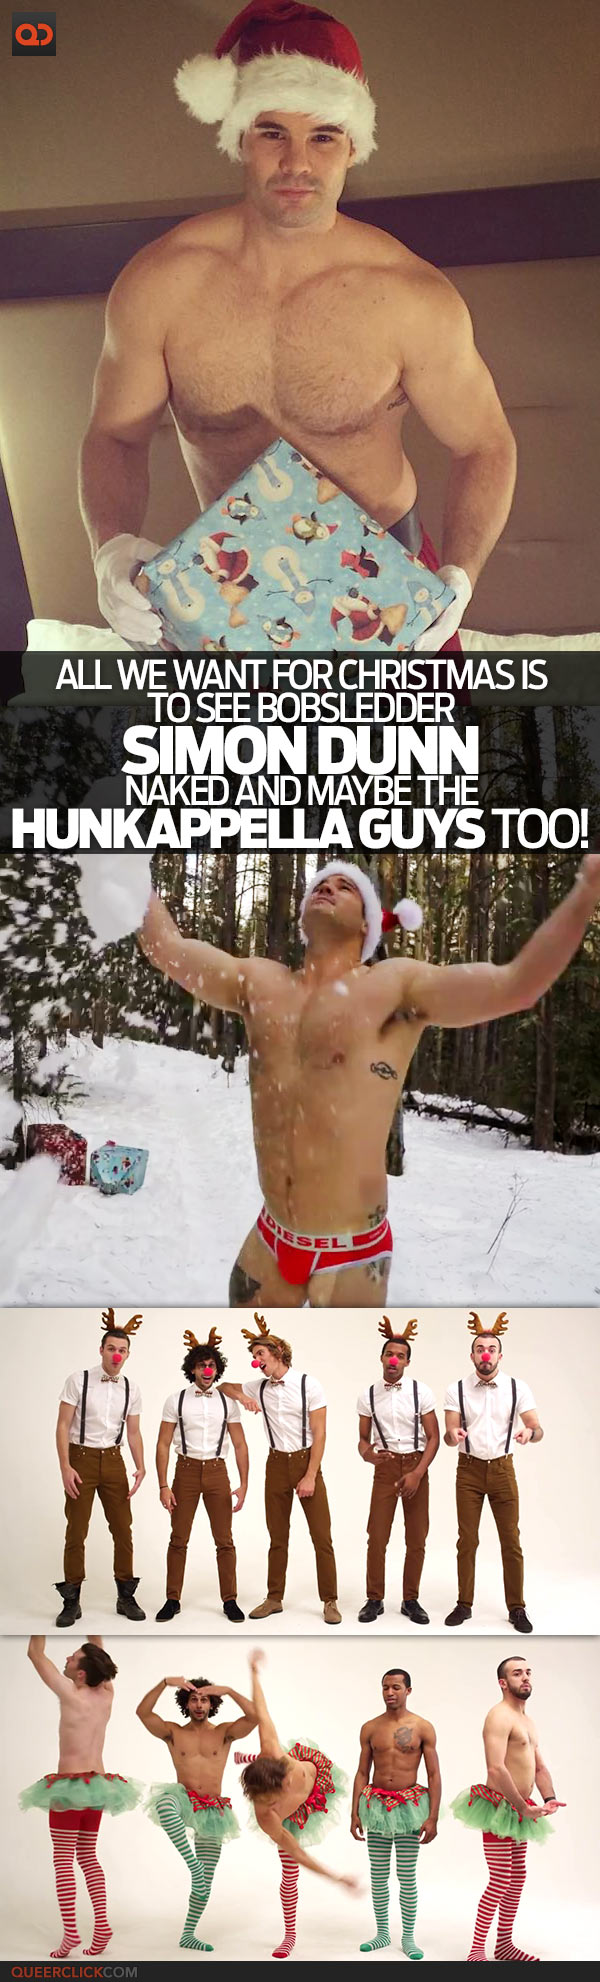 All We Want For Christmas Is To See Bobsledder Simon Dunn Naked… And Maybe The Hunkappella Guys Too!